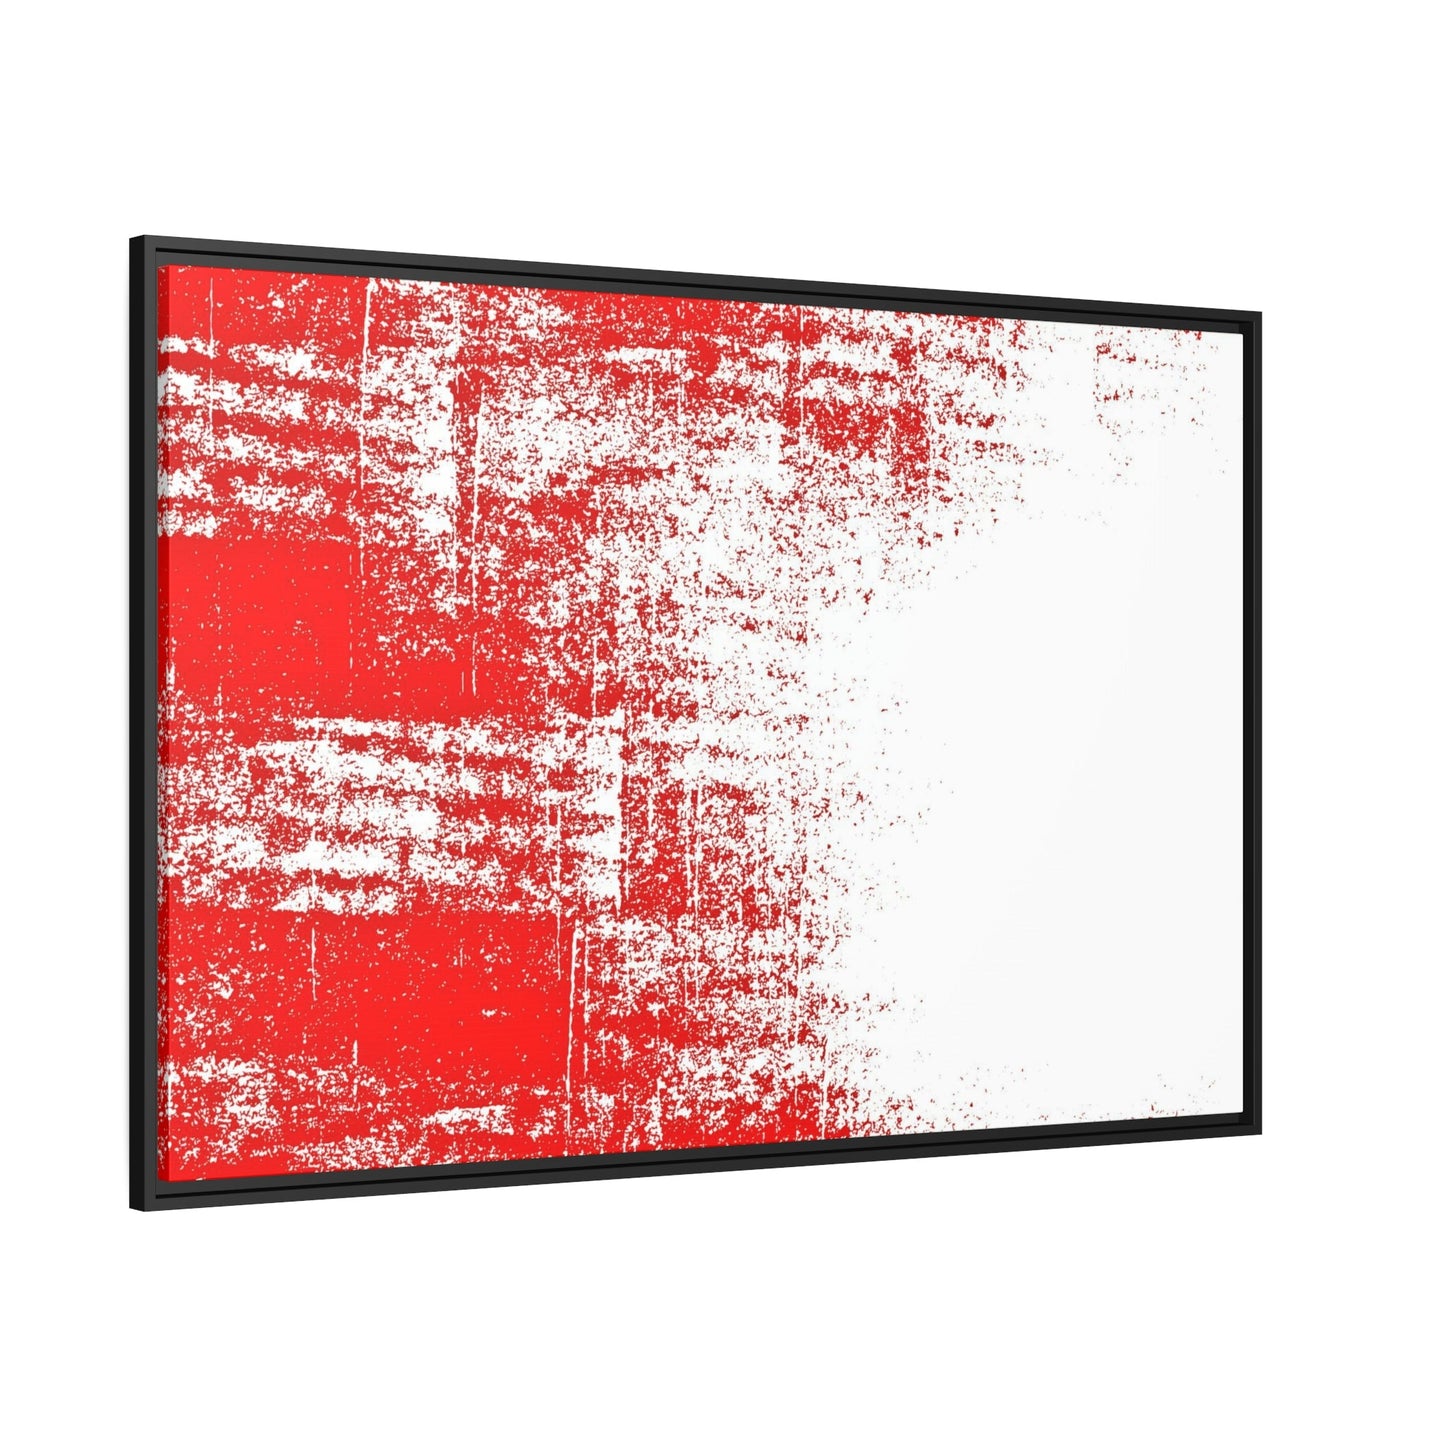 The Power of Red: Abstract Wall Art and Prints on Natural Canvas